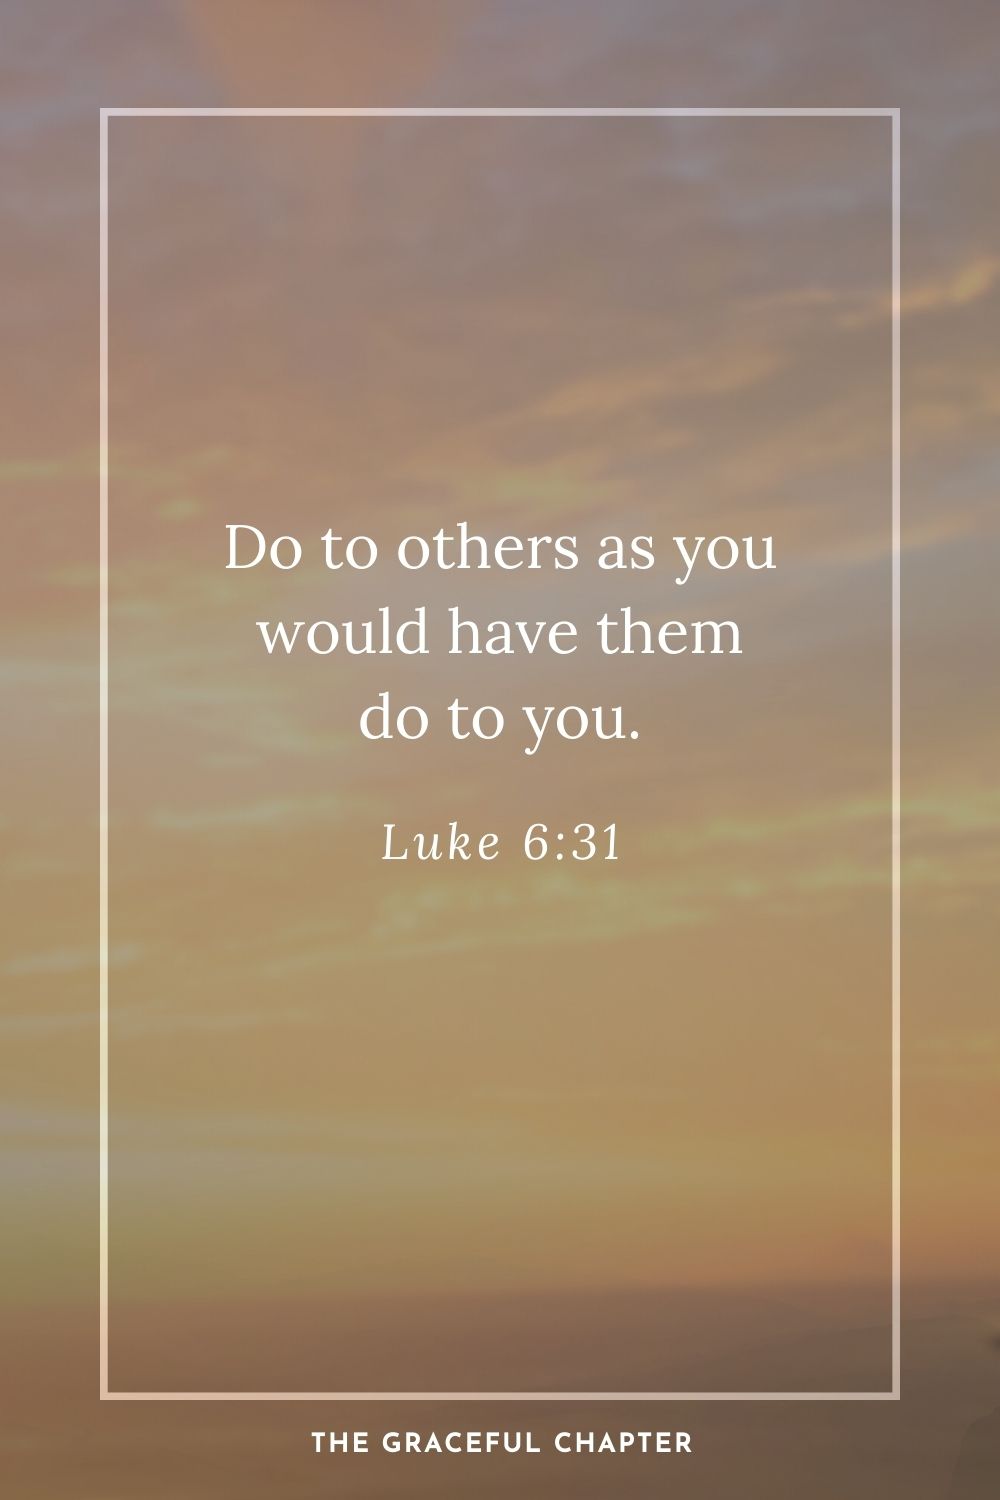 Do to others as you would have them do to you. Luke 6:31